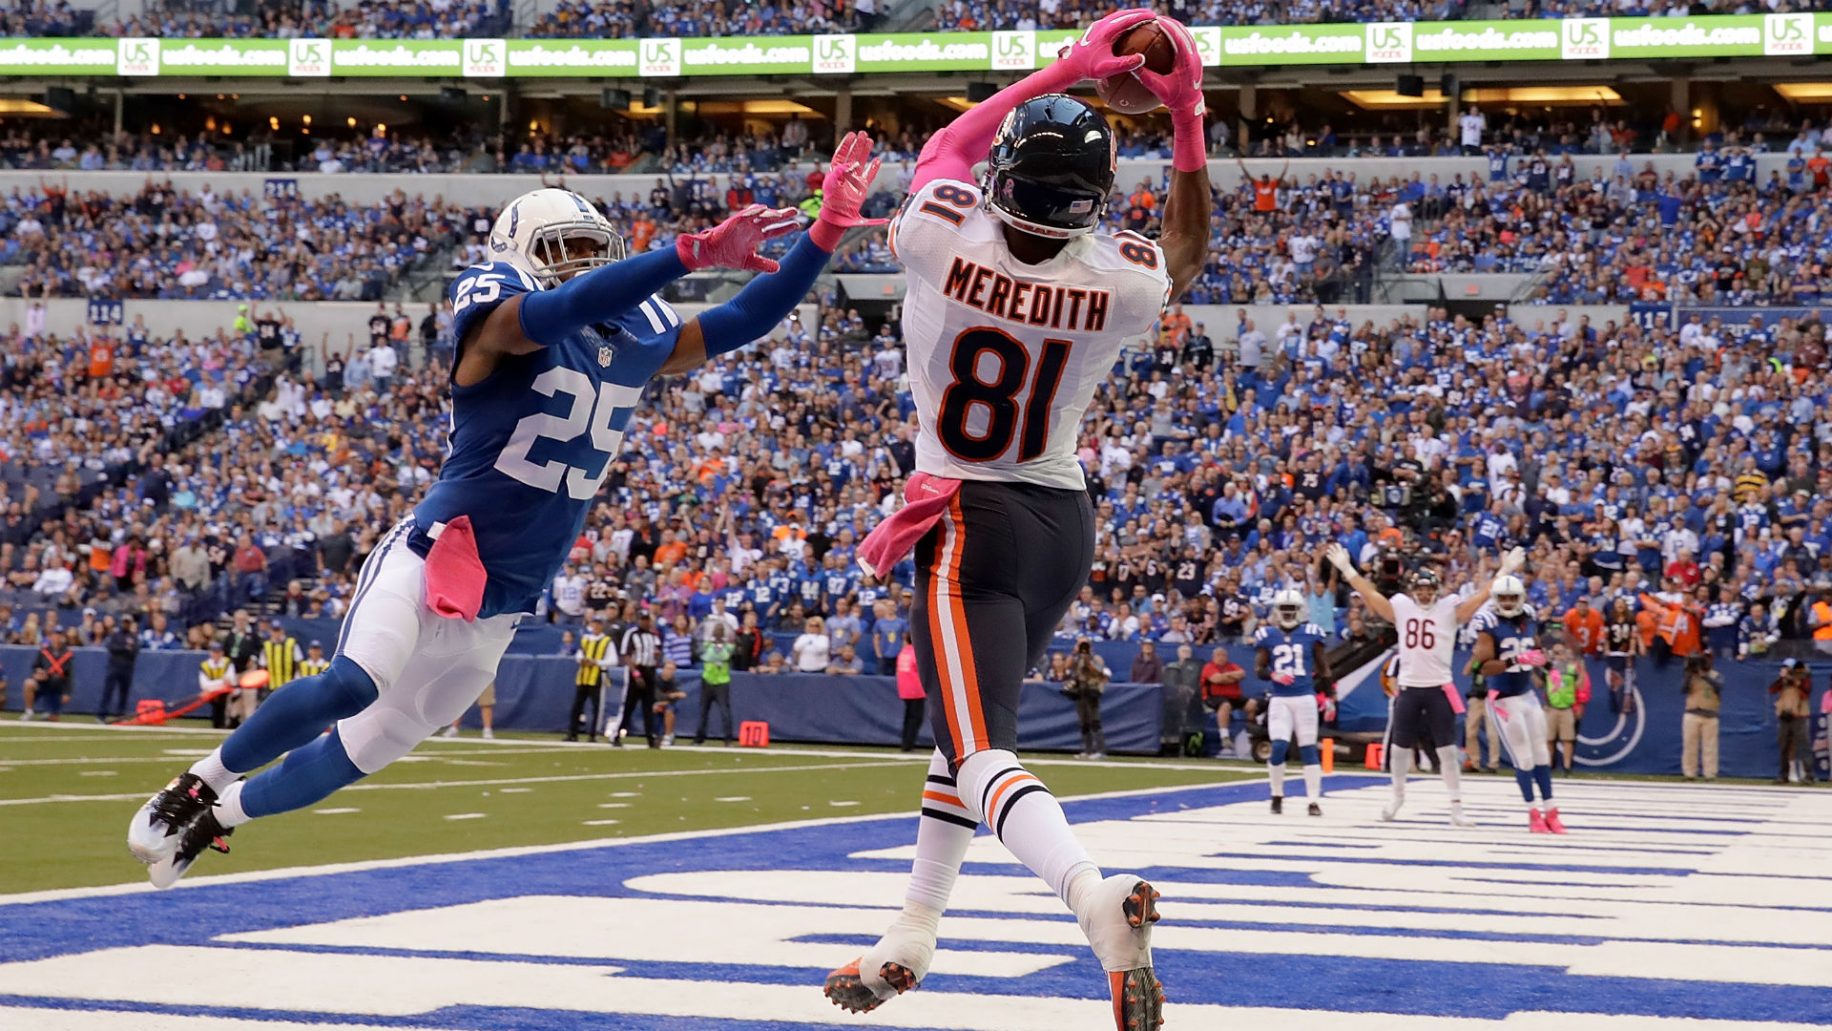 Chicago Bears wide receiver Cameron Meredith nabs a touchdown against the Indianapolis Colts